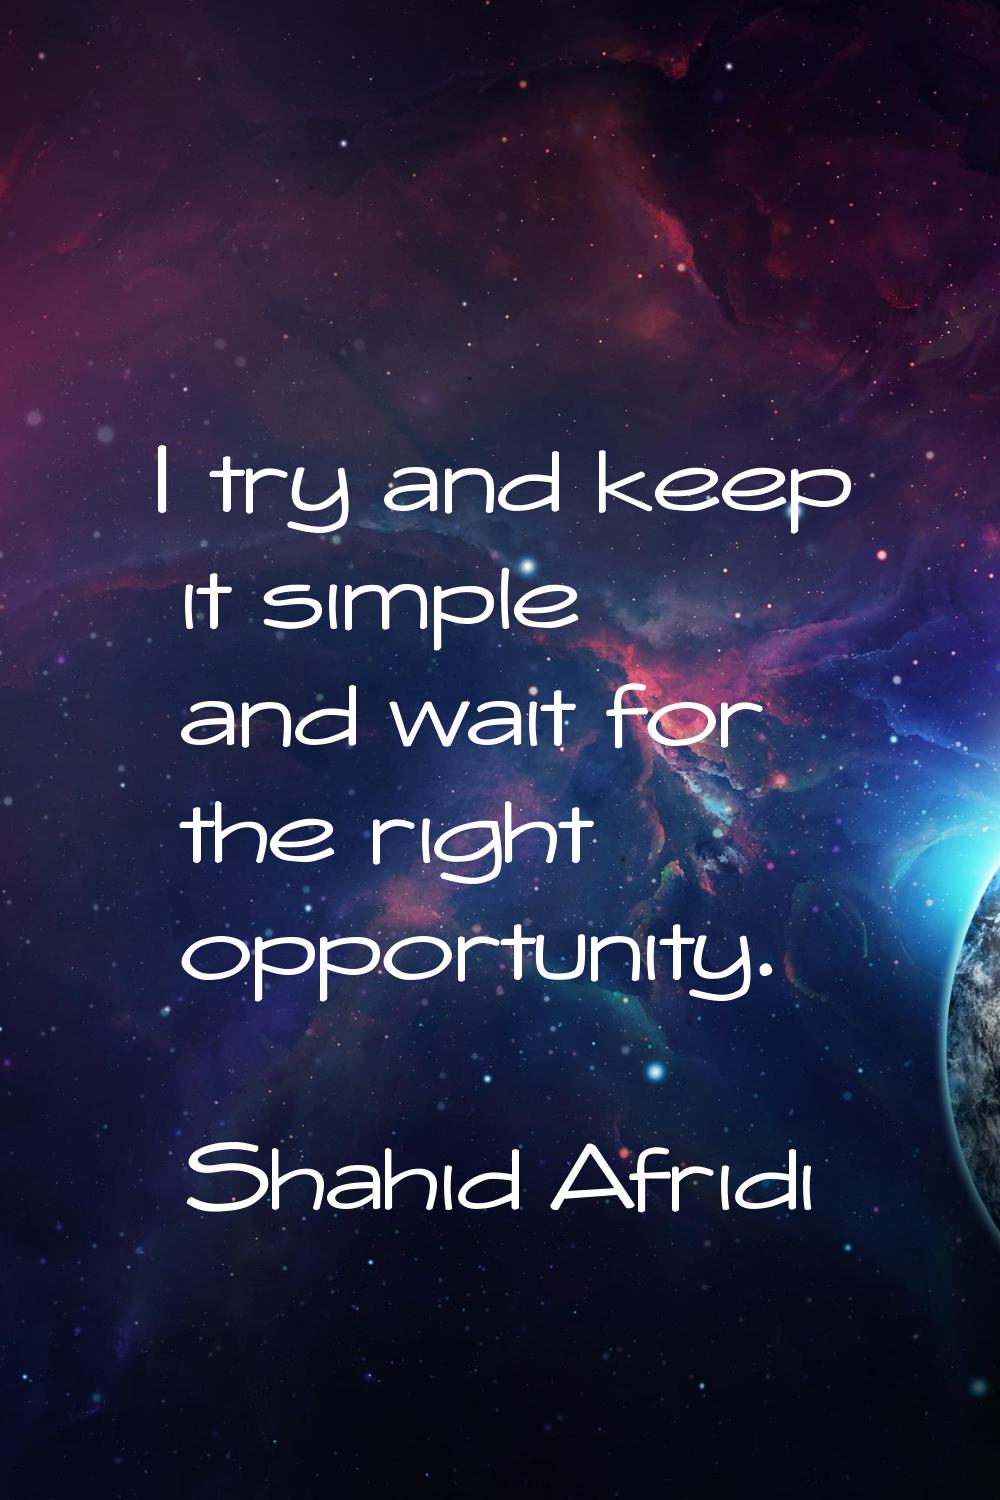 I try and keep it simple and wait for the right opportunity.